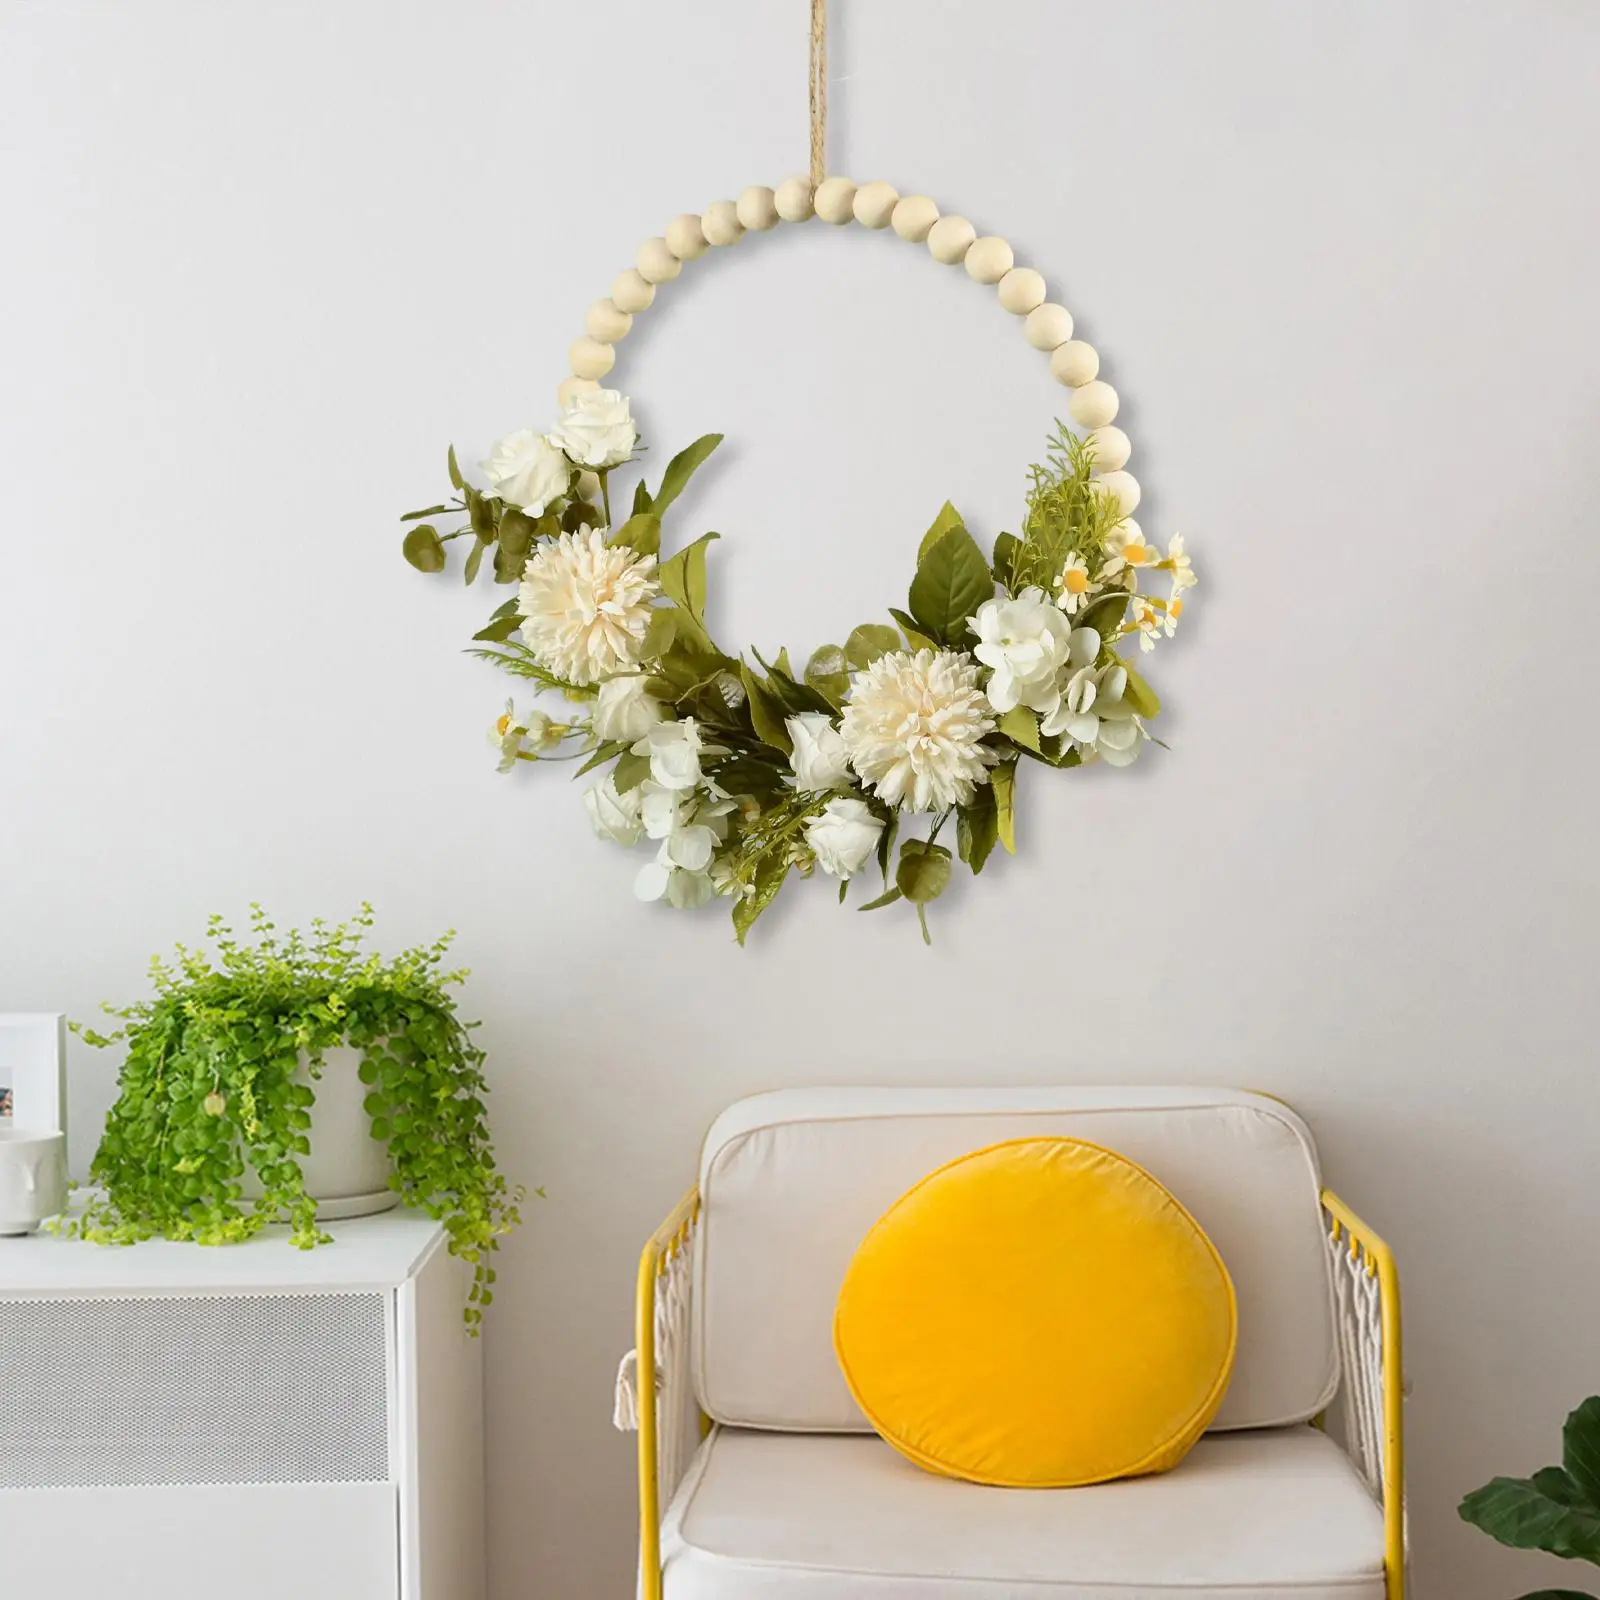 Artificial Flower Wreath Garland Wood Beads Circle Hanging Greenery Leaves Spring Wreath for Home Indoor Wedding Outdoor Decor